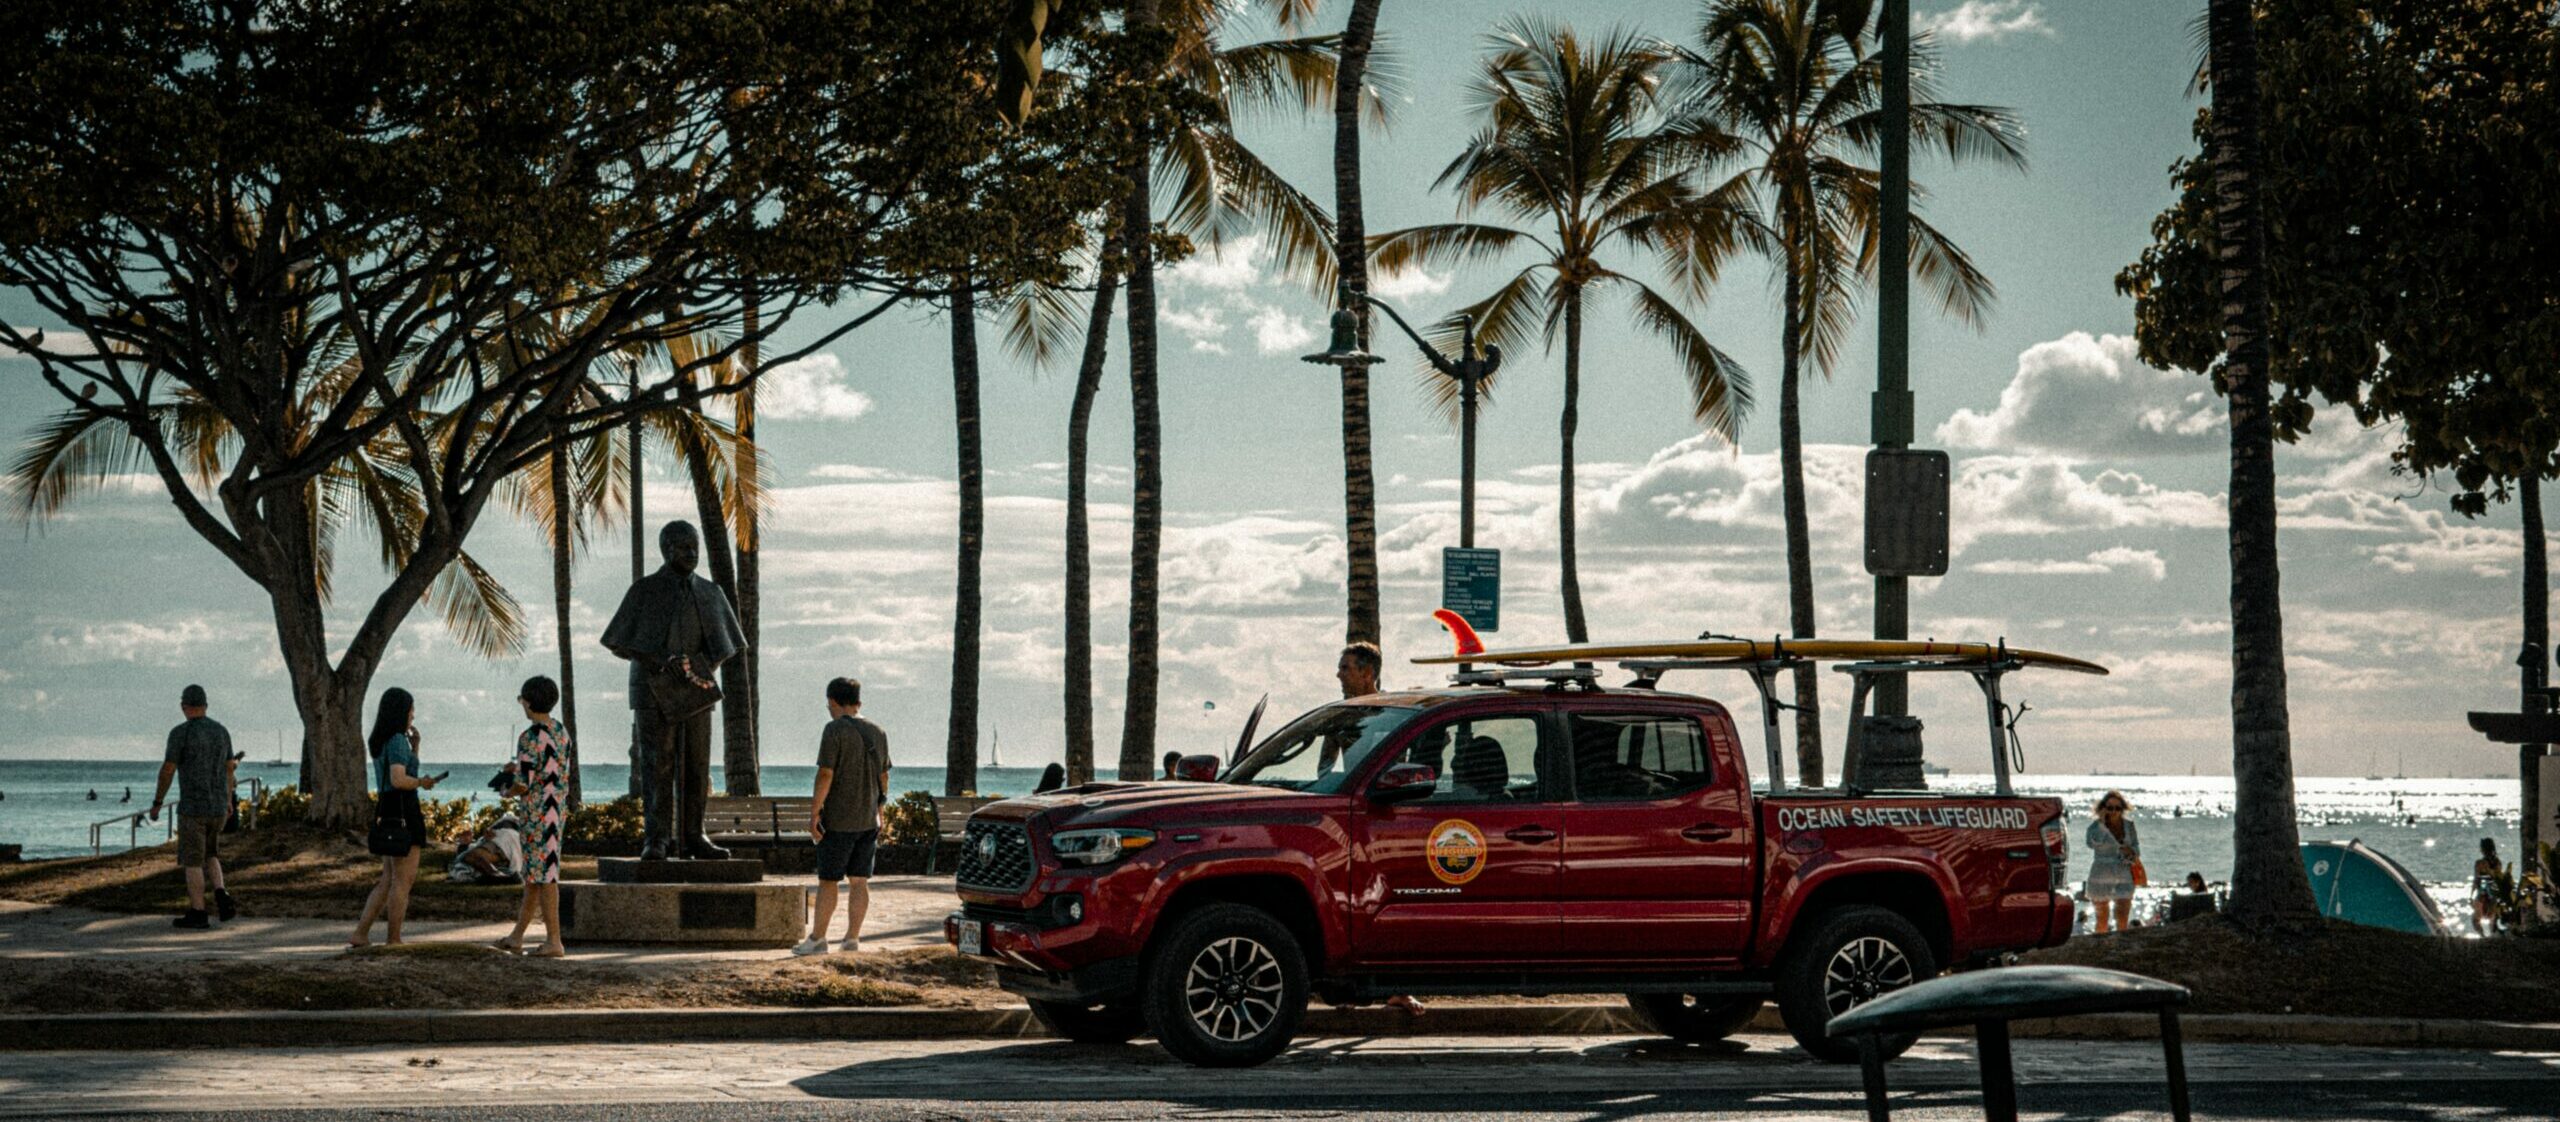 Lifeguard truck parked in front of a Waikiki beach.